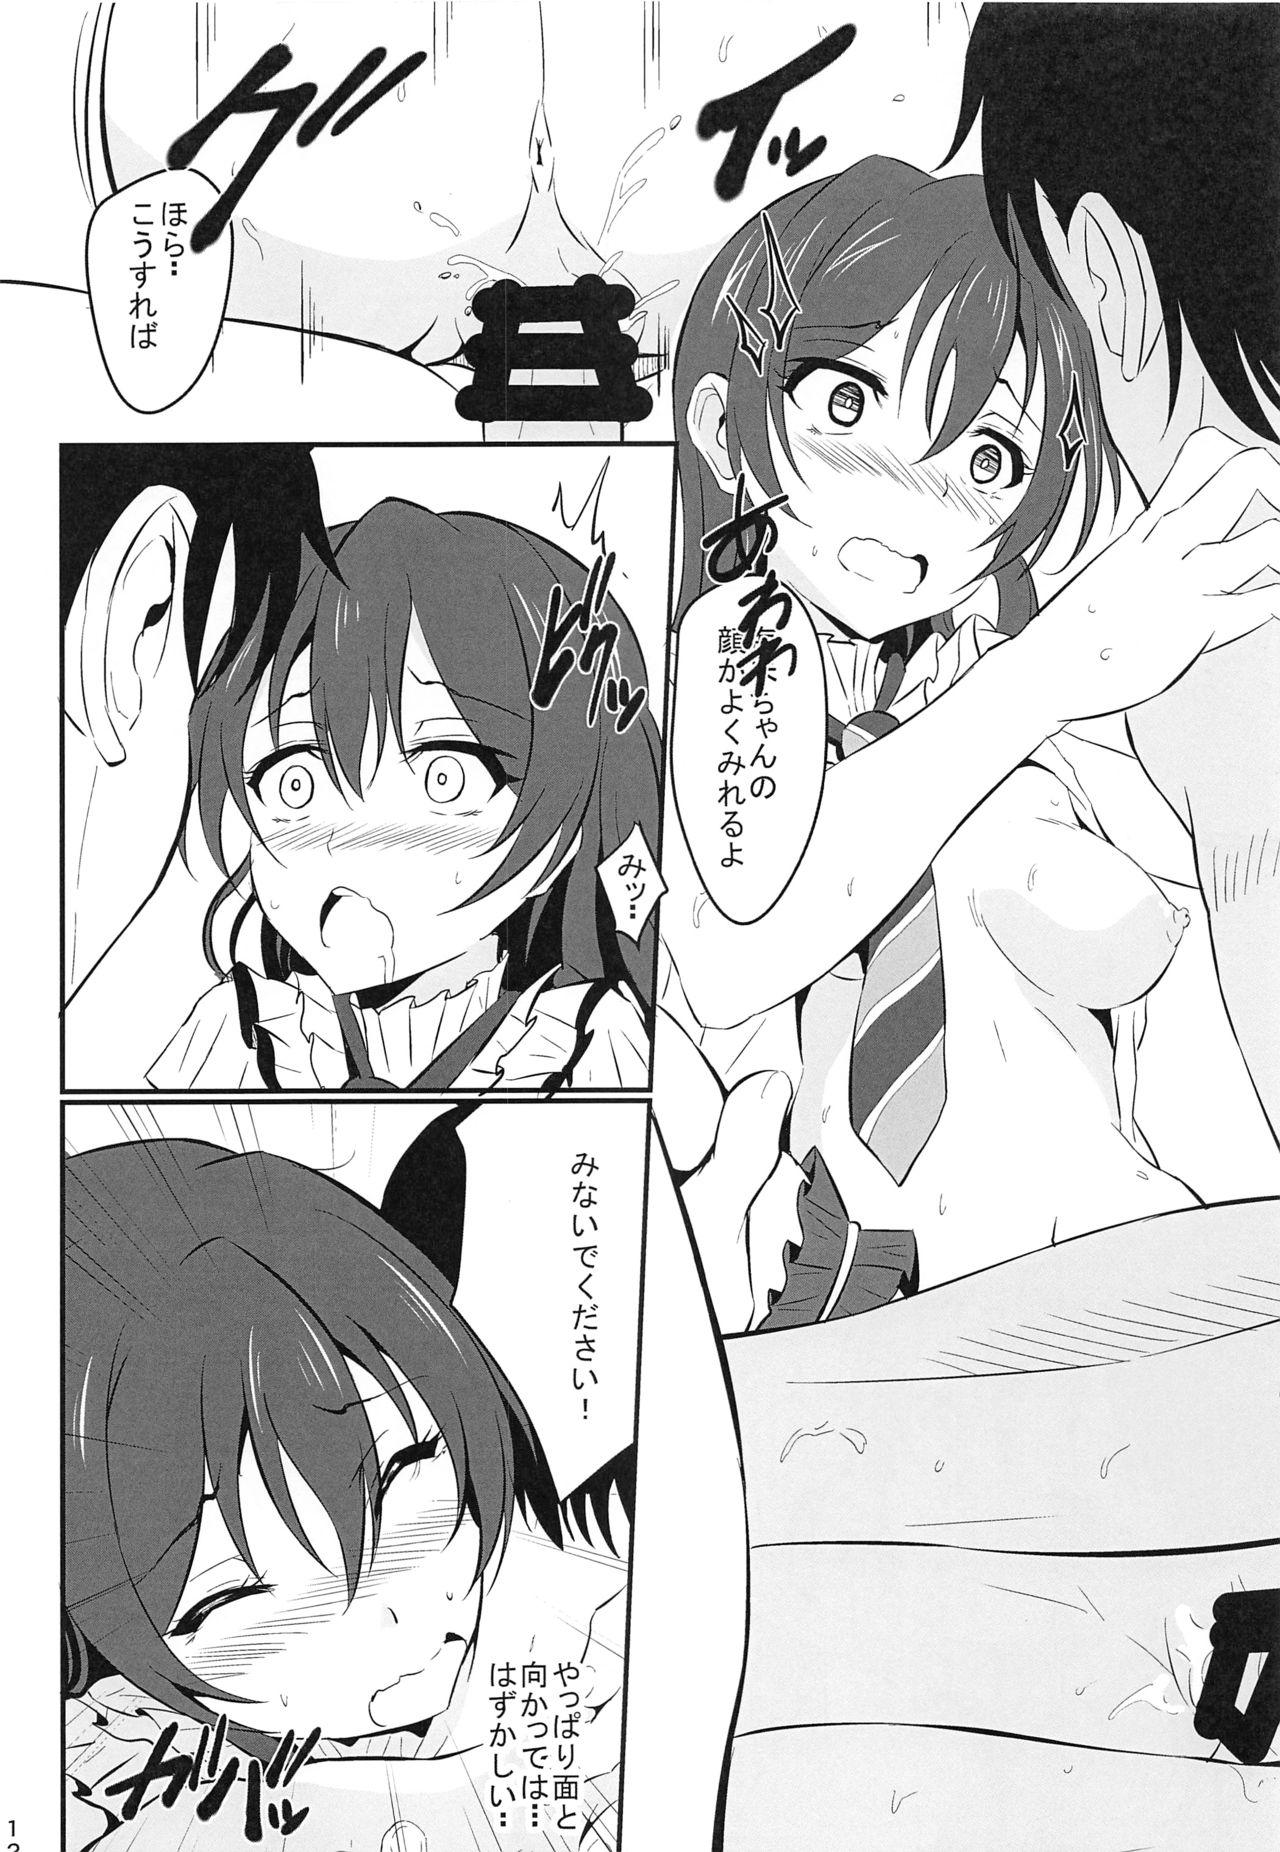 Whipping Umi LOVER - Love live Blackmail - Page 11